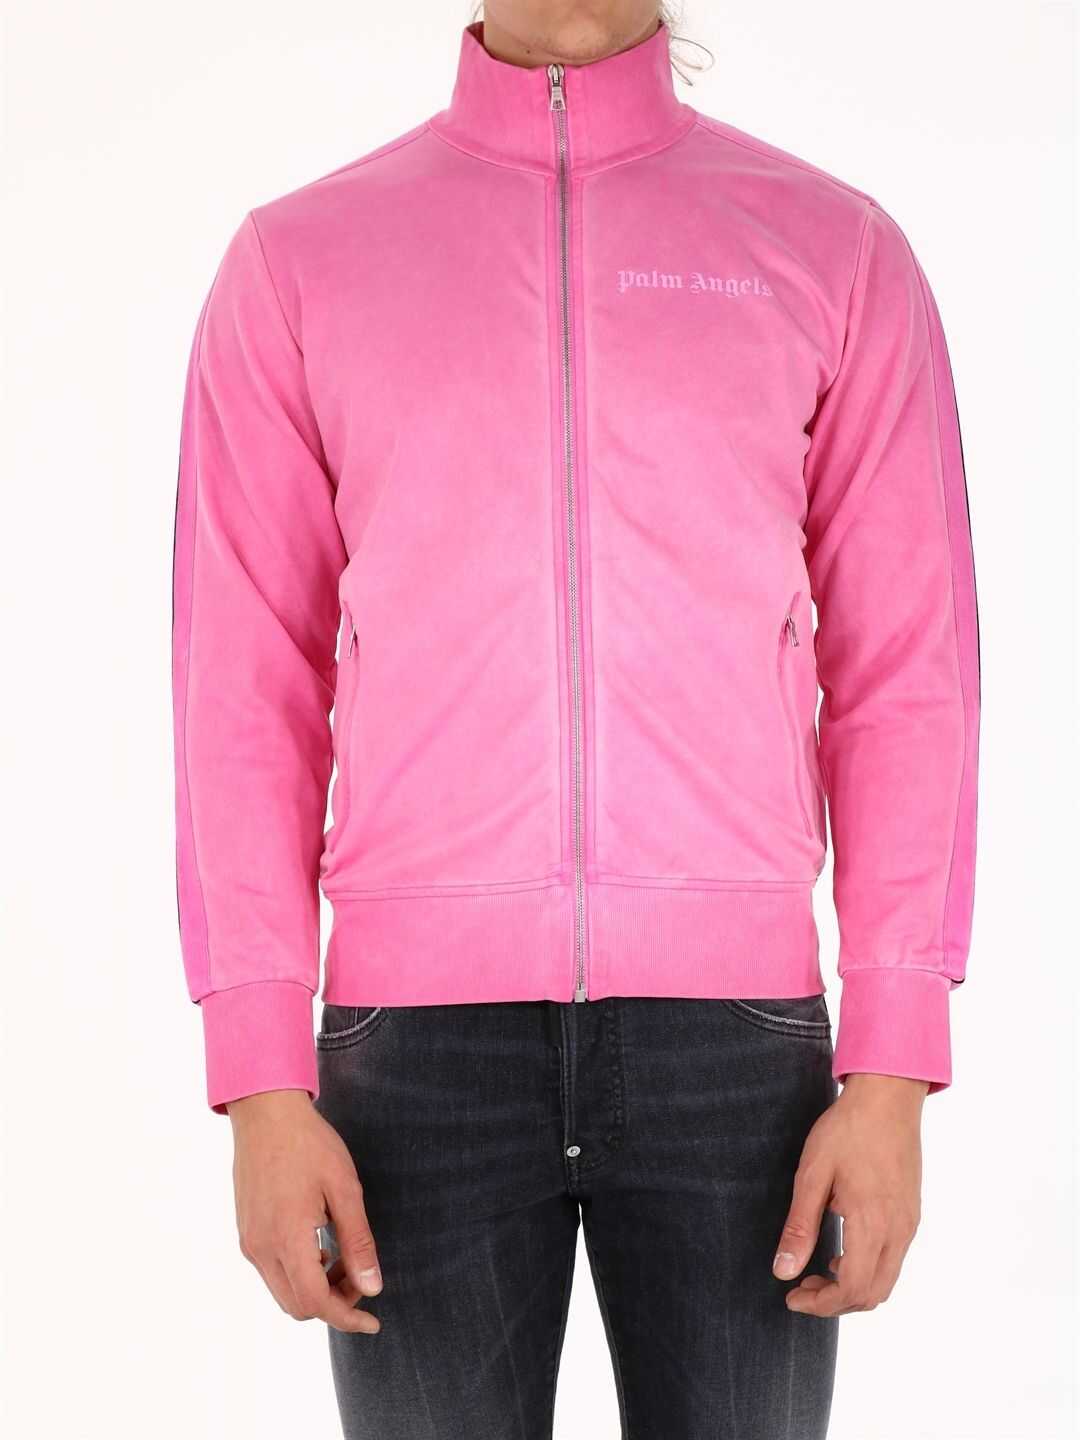 Palm Angels Garment Dyed Track Jacket Pink